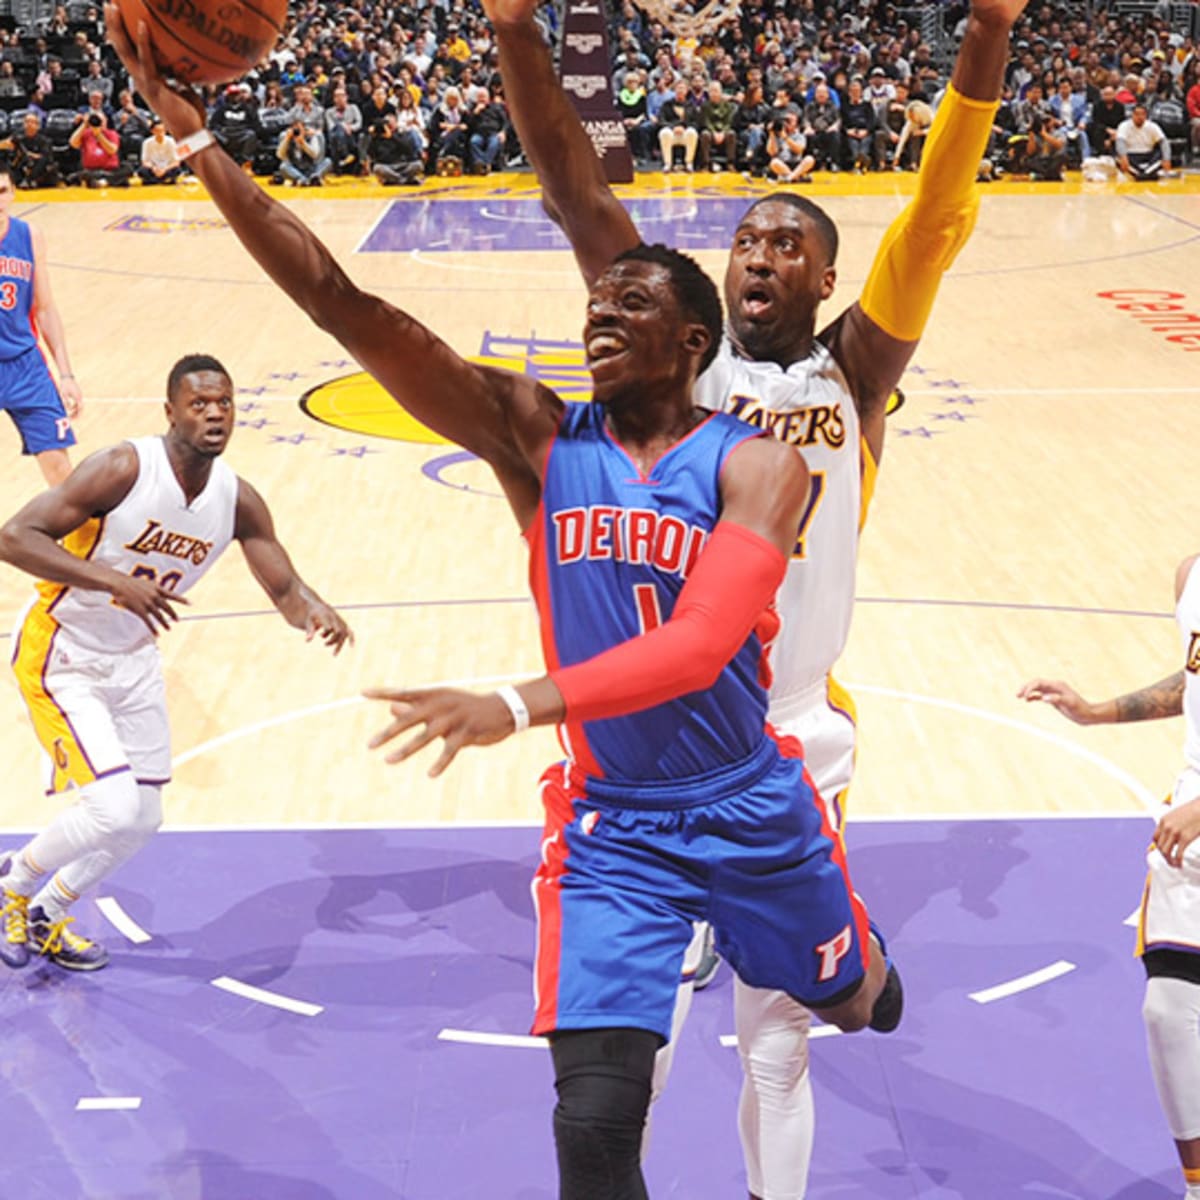 It's been a disappointing season for Pistons' Reggie Jackson - The